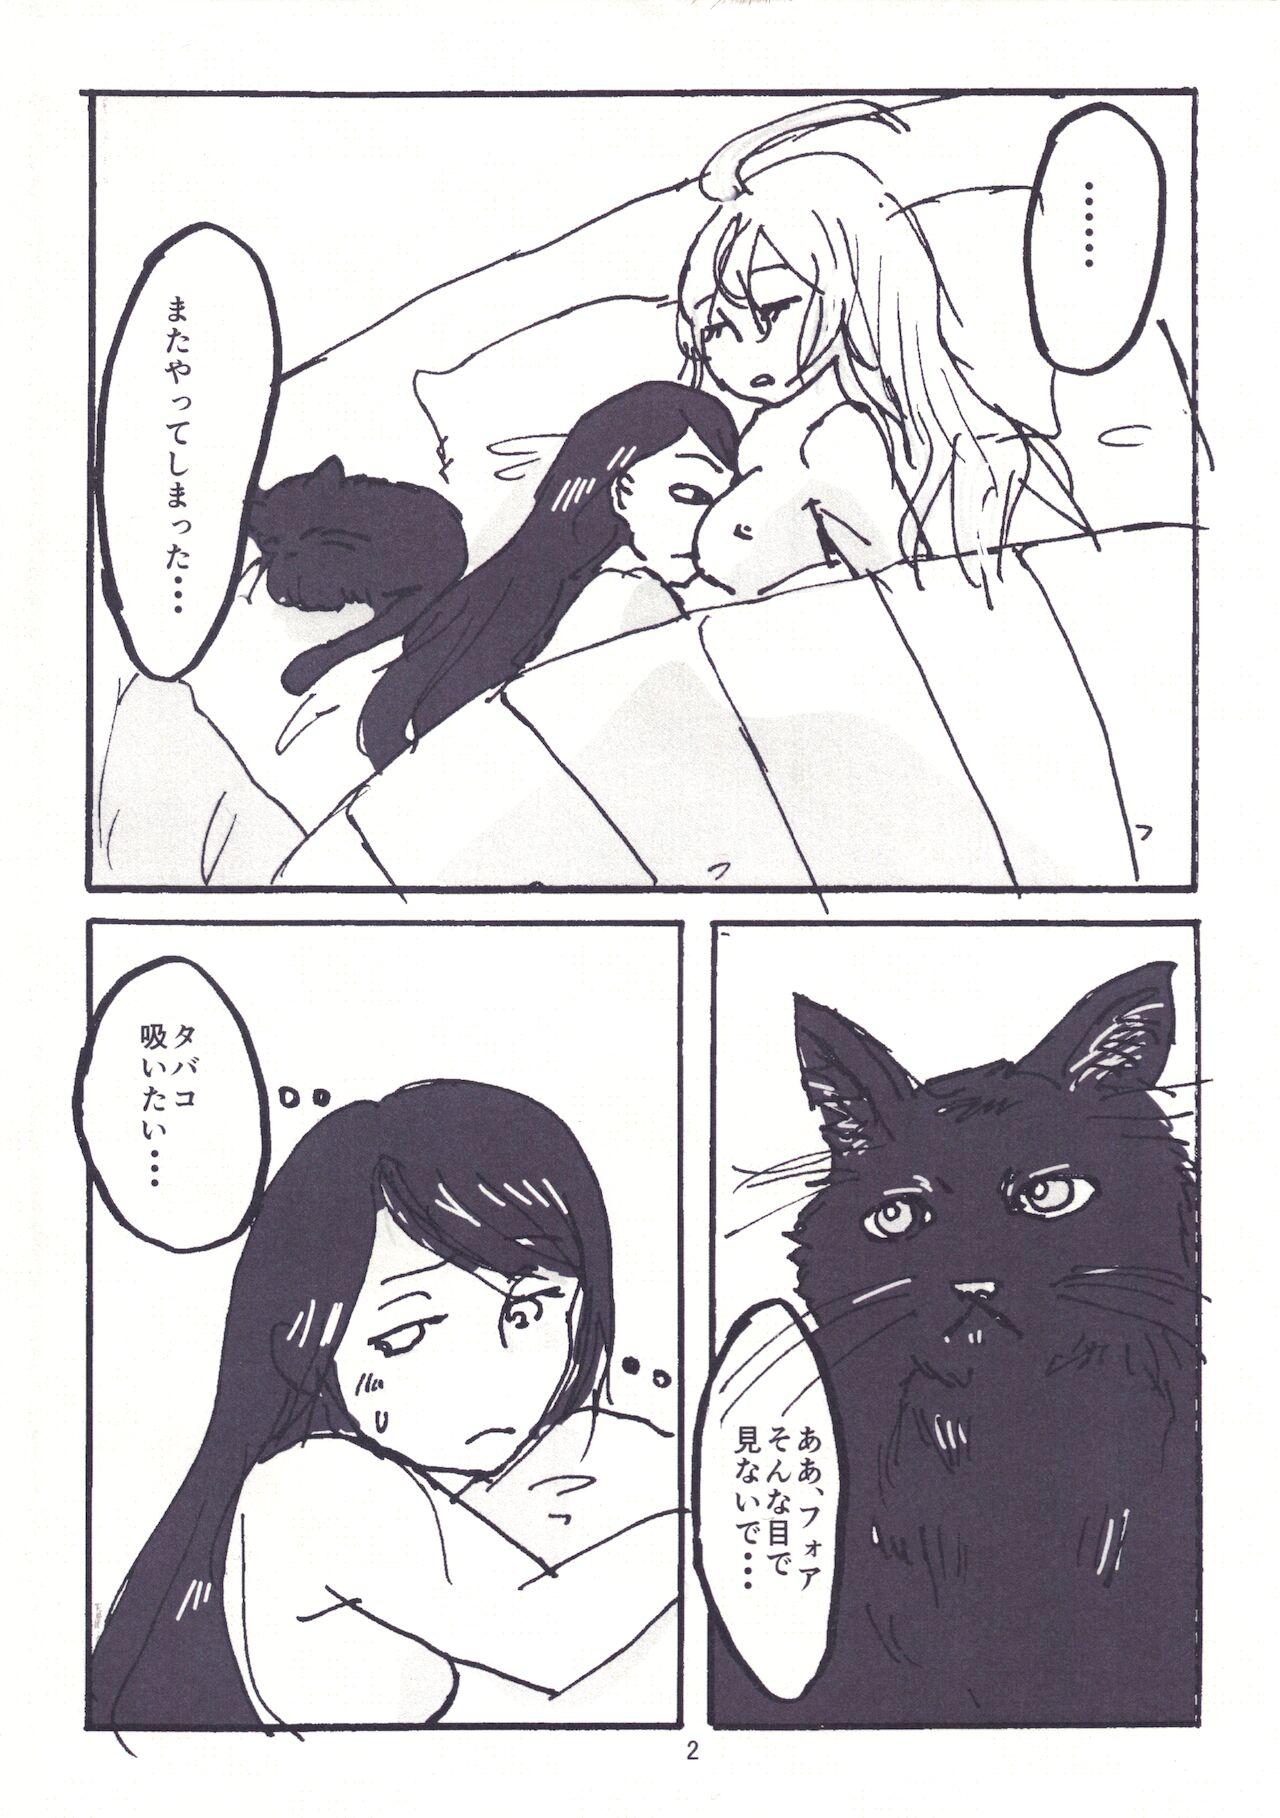 Highheels NOT SO BAD - Va-11 hall-a Fat Pussy - Page 4